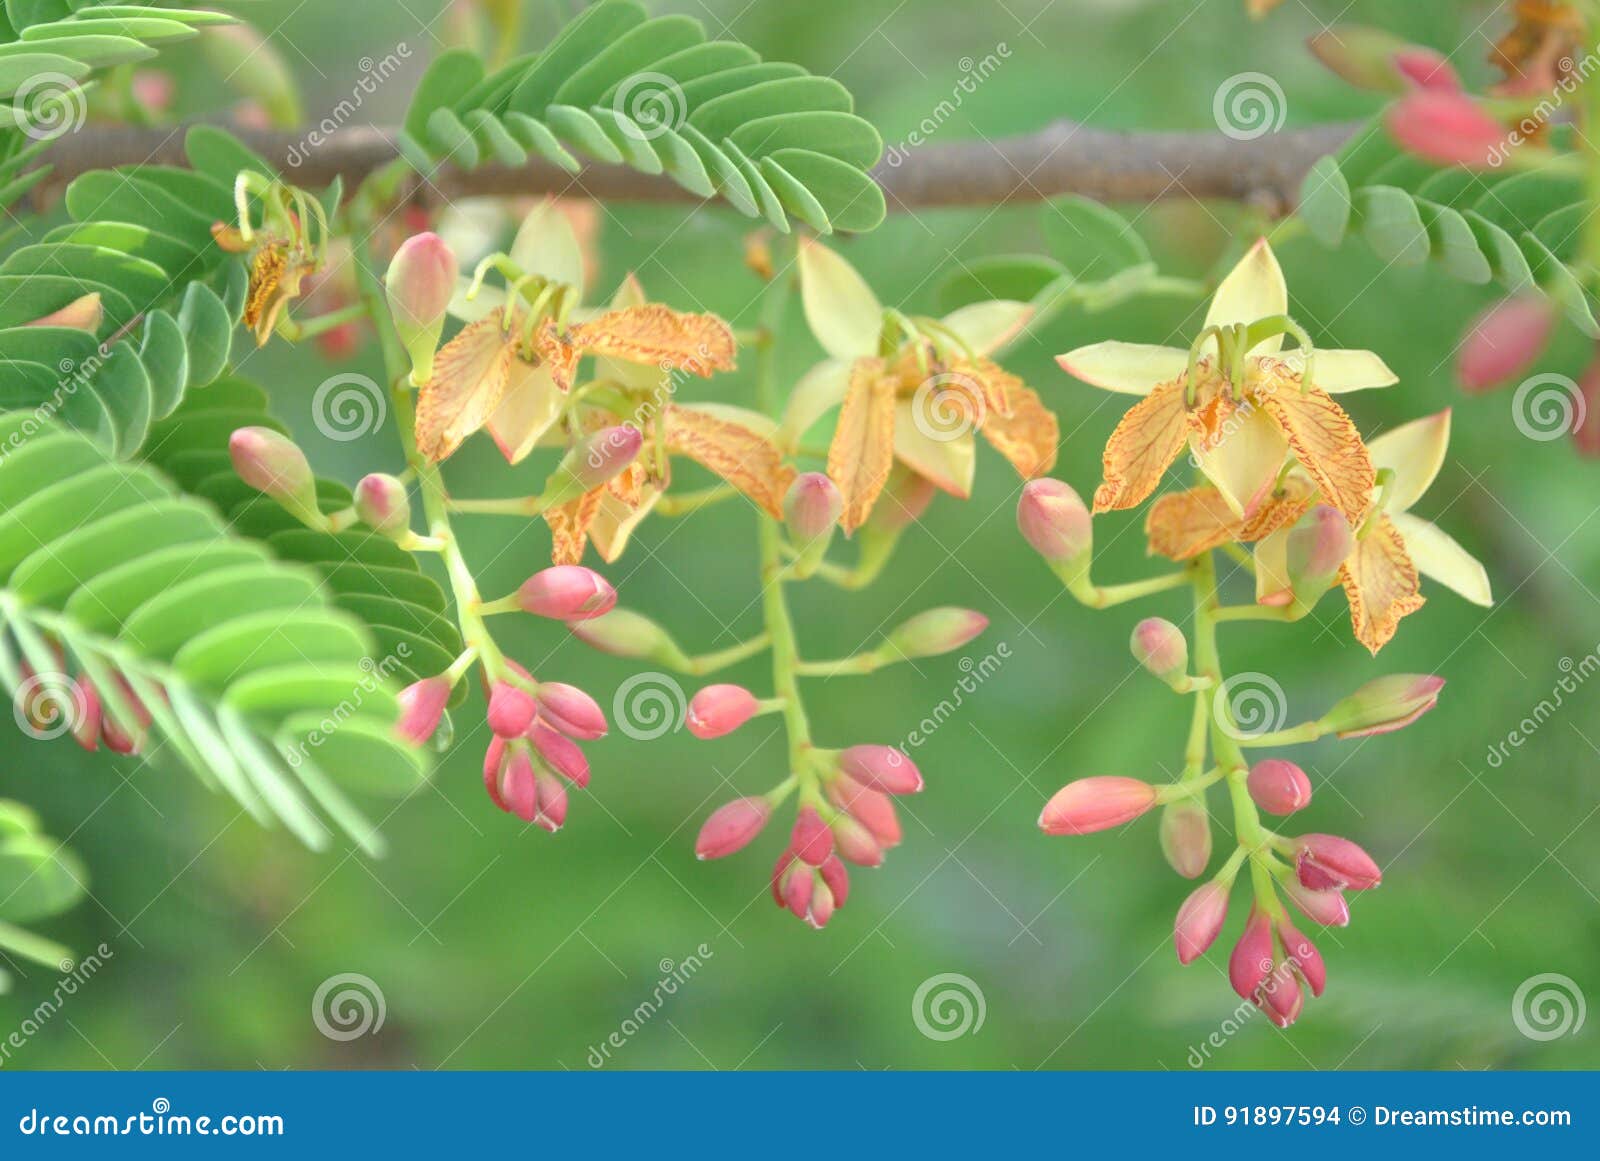 1 470 Tamarind Flower Photos Free Royalty Free Stock Photos From Dreamstime